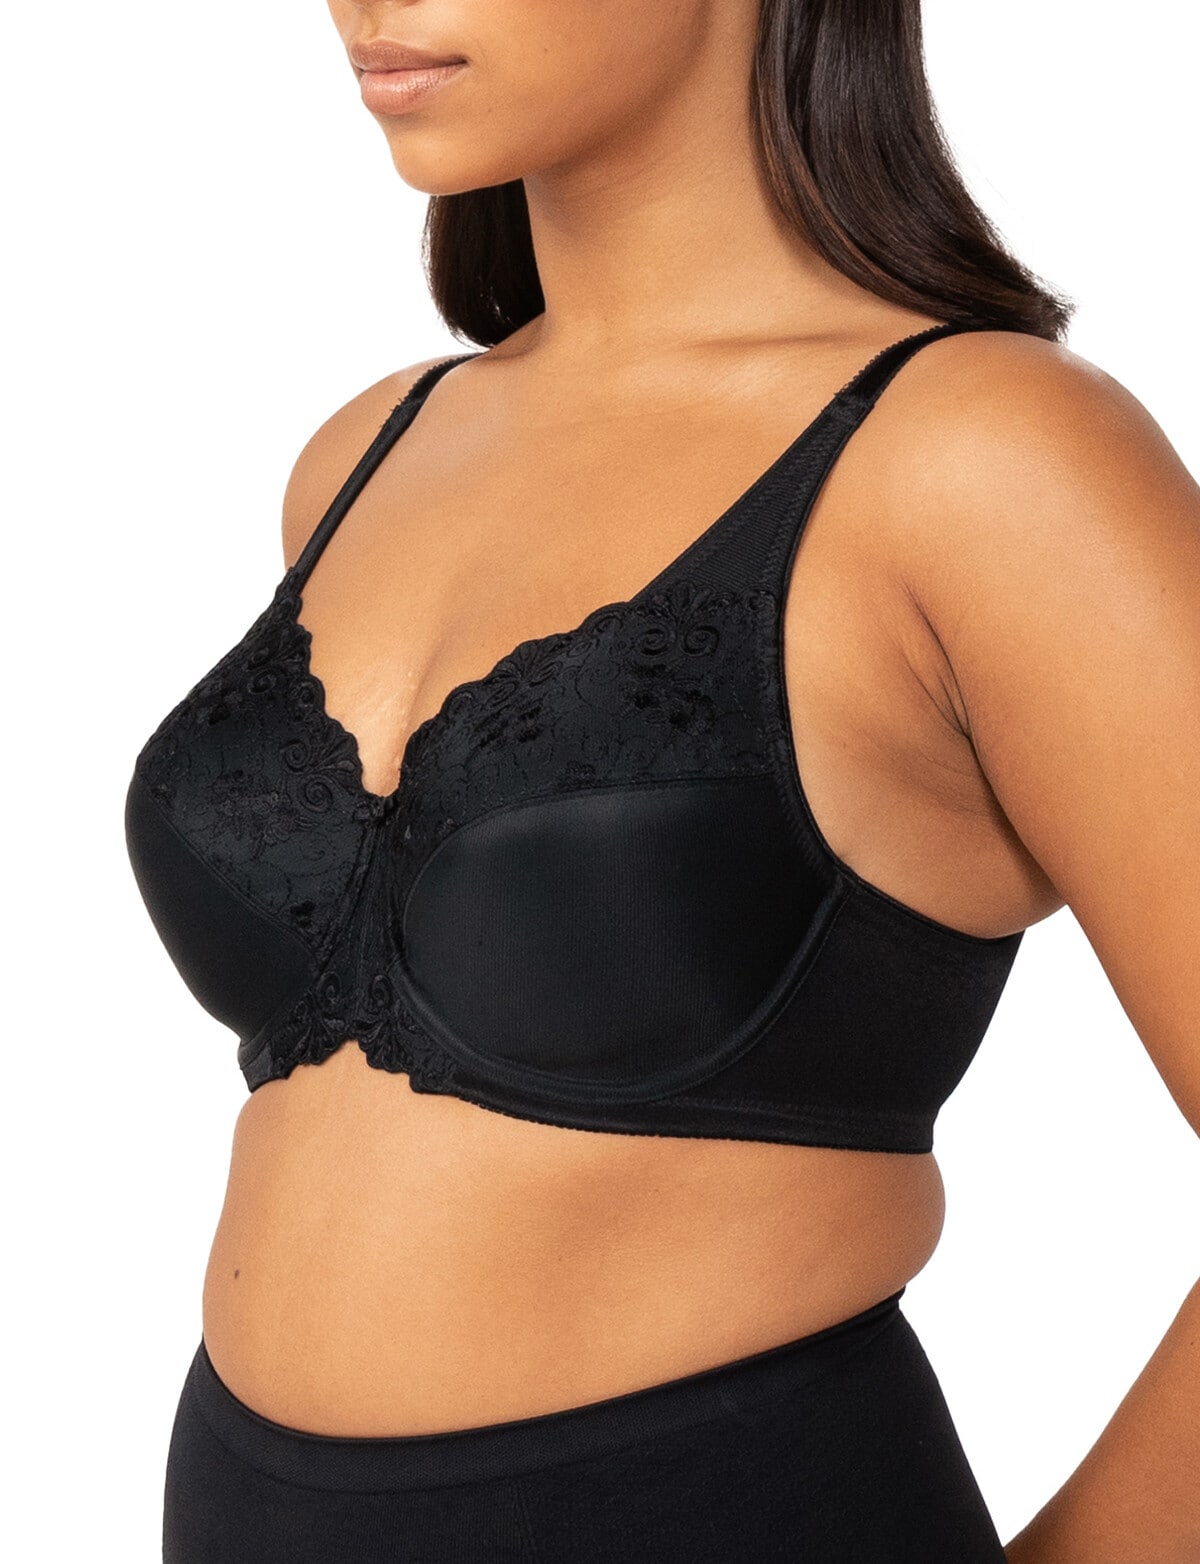 Bodycare Embroidered Cup Bra For Women - 2 Xl, Black price in UAE